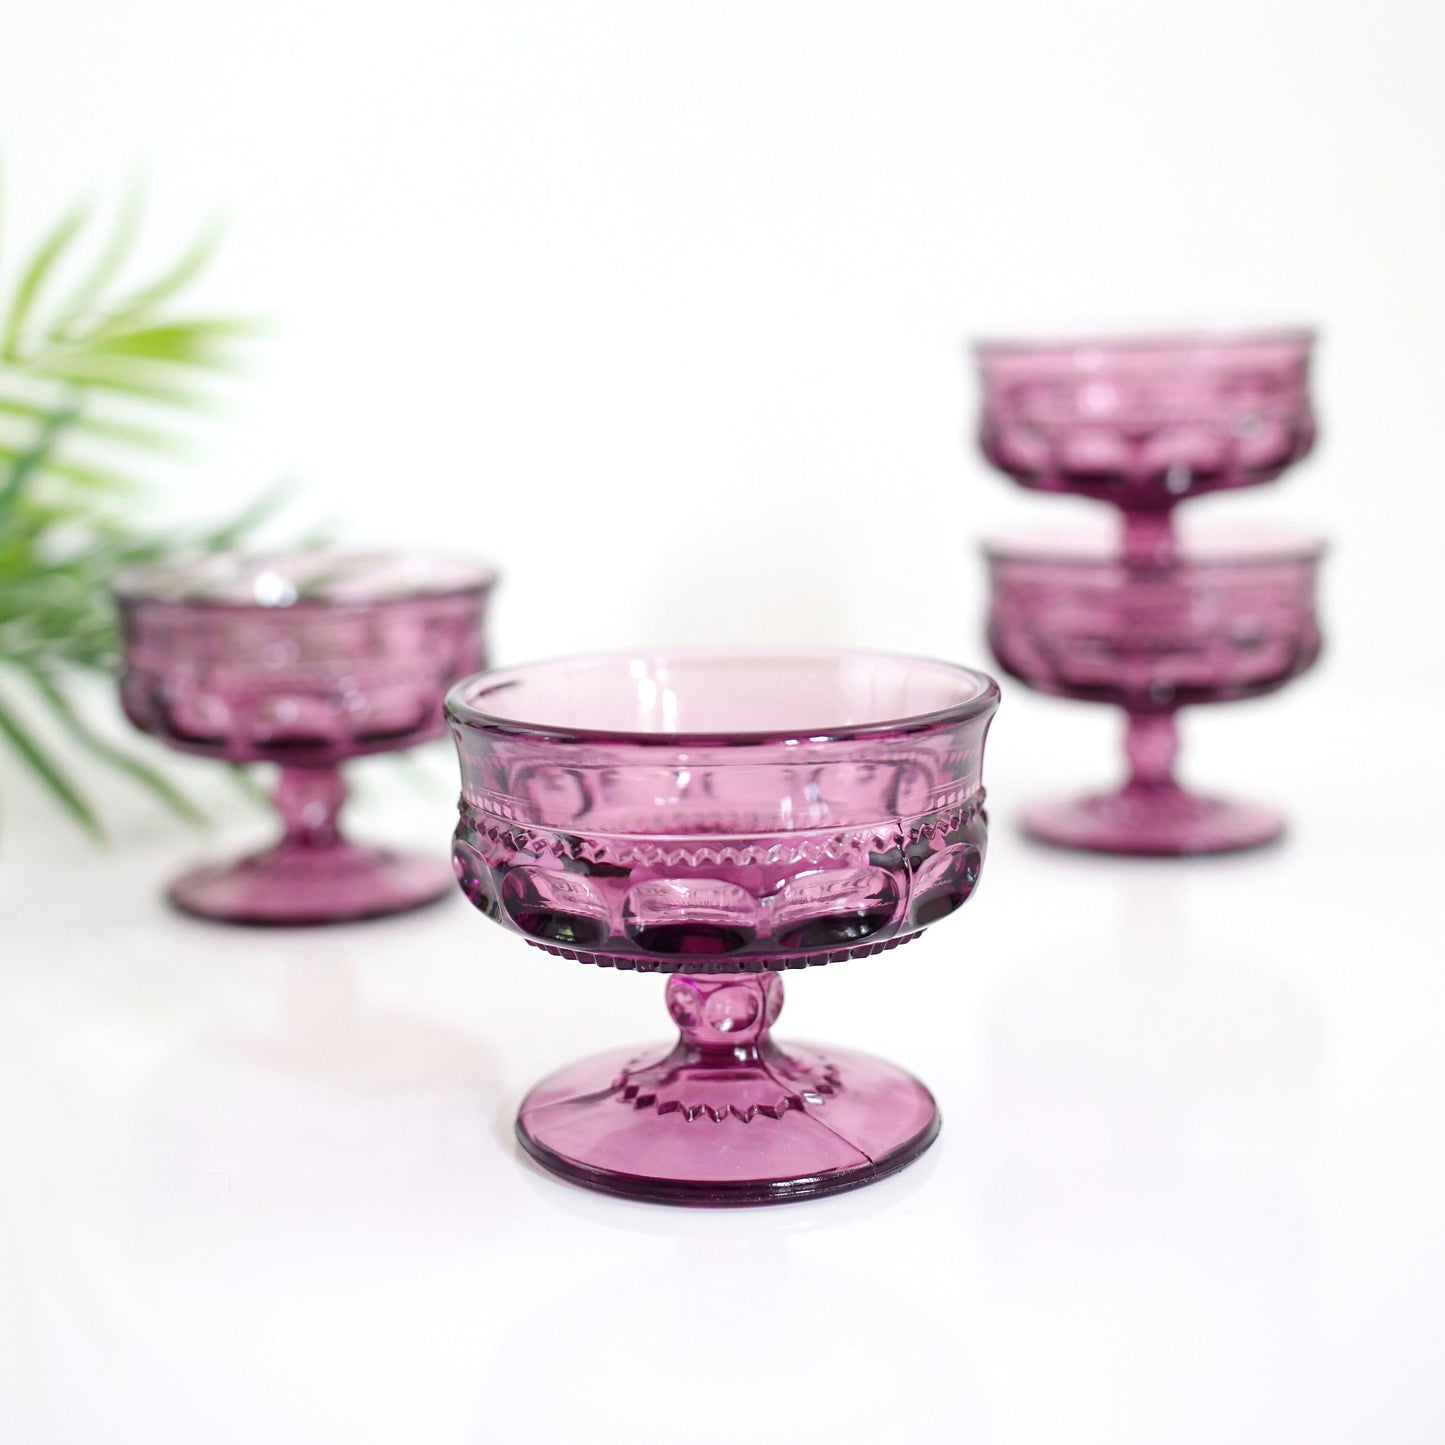 SOLD - Vintage Indiana Glass Amethyst King's Crown Coupe Glasses